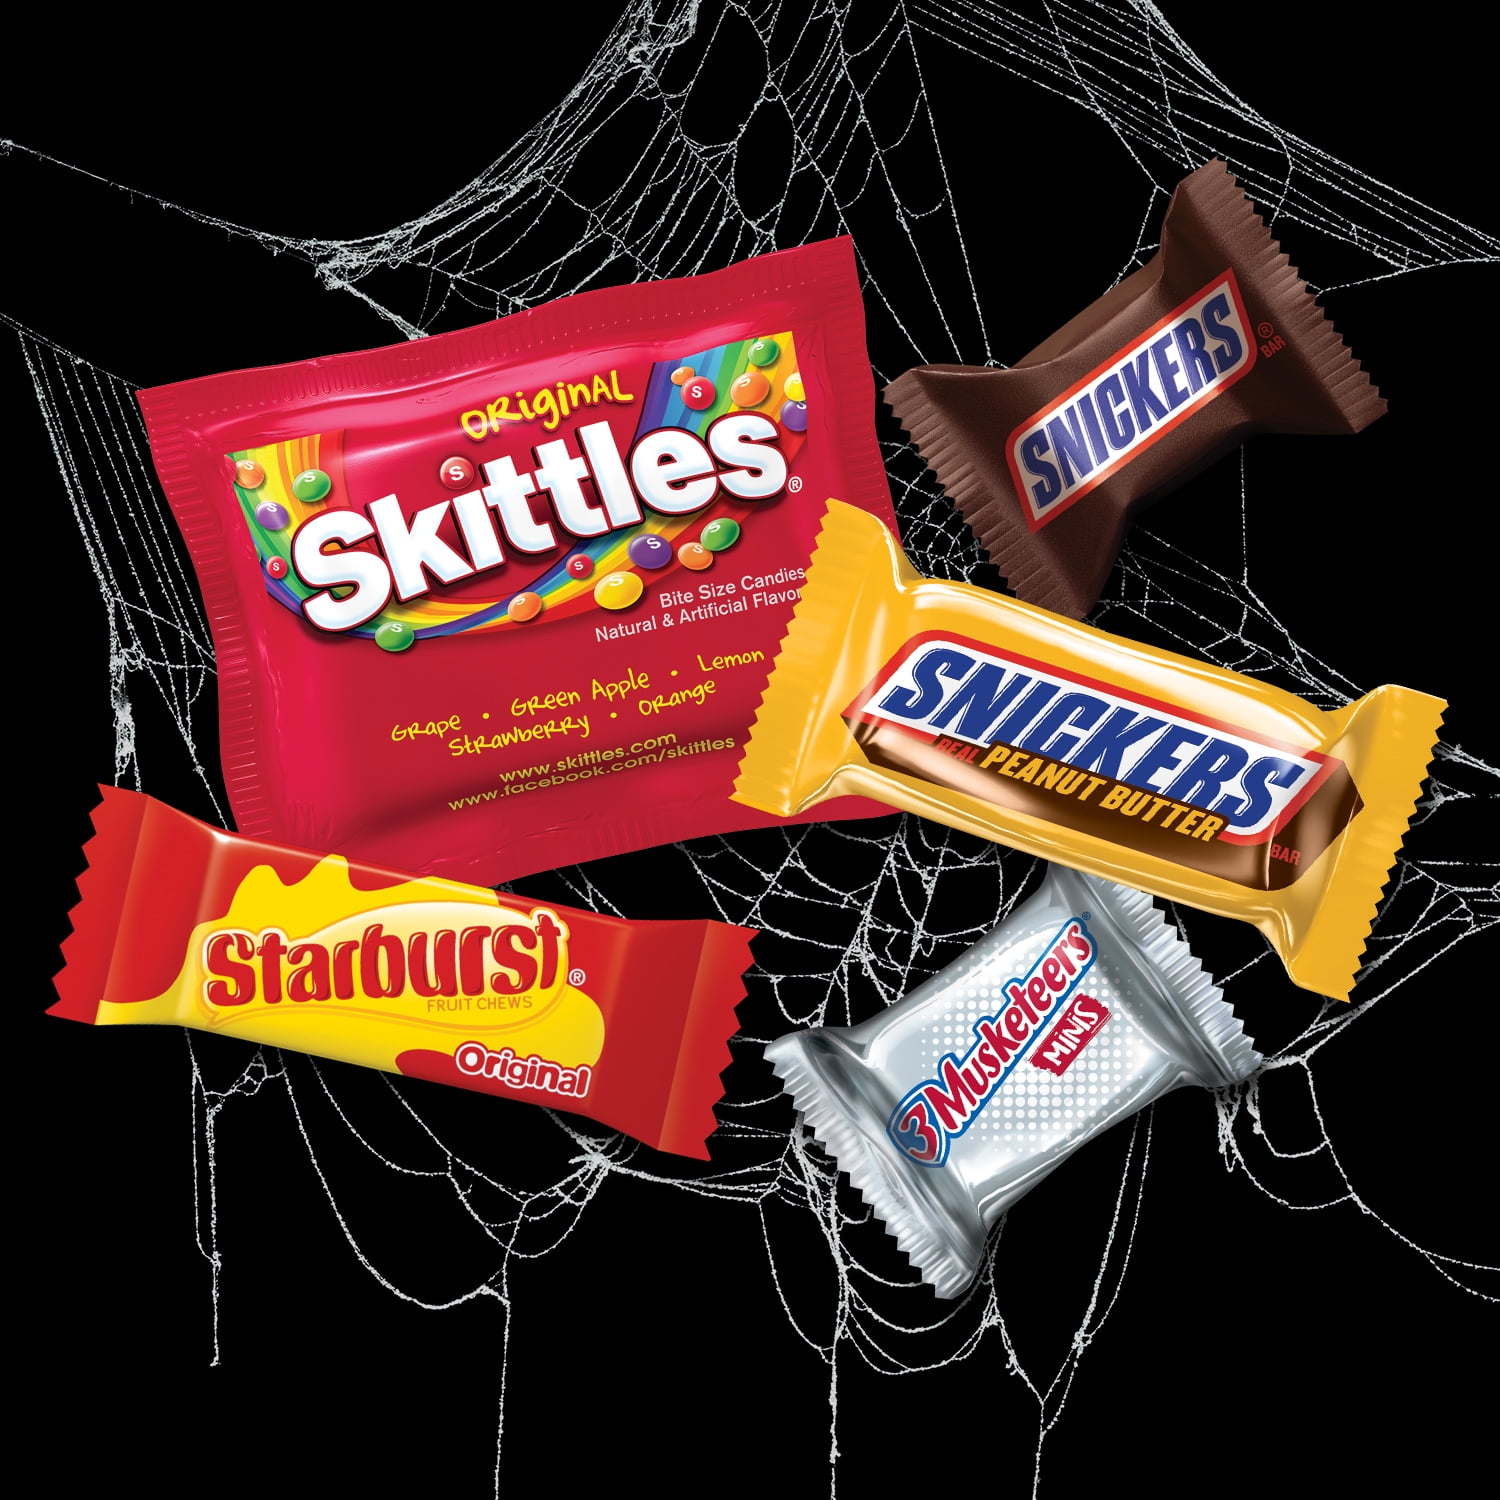 M&M'S & Snickers Peanut & Peanut Butter Assorted Bulk Chocolate Halloween  Candy, 50 ct, 25.91 oz Ingredients - CVS Pharmacy